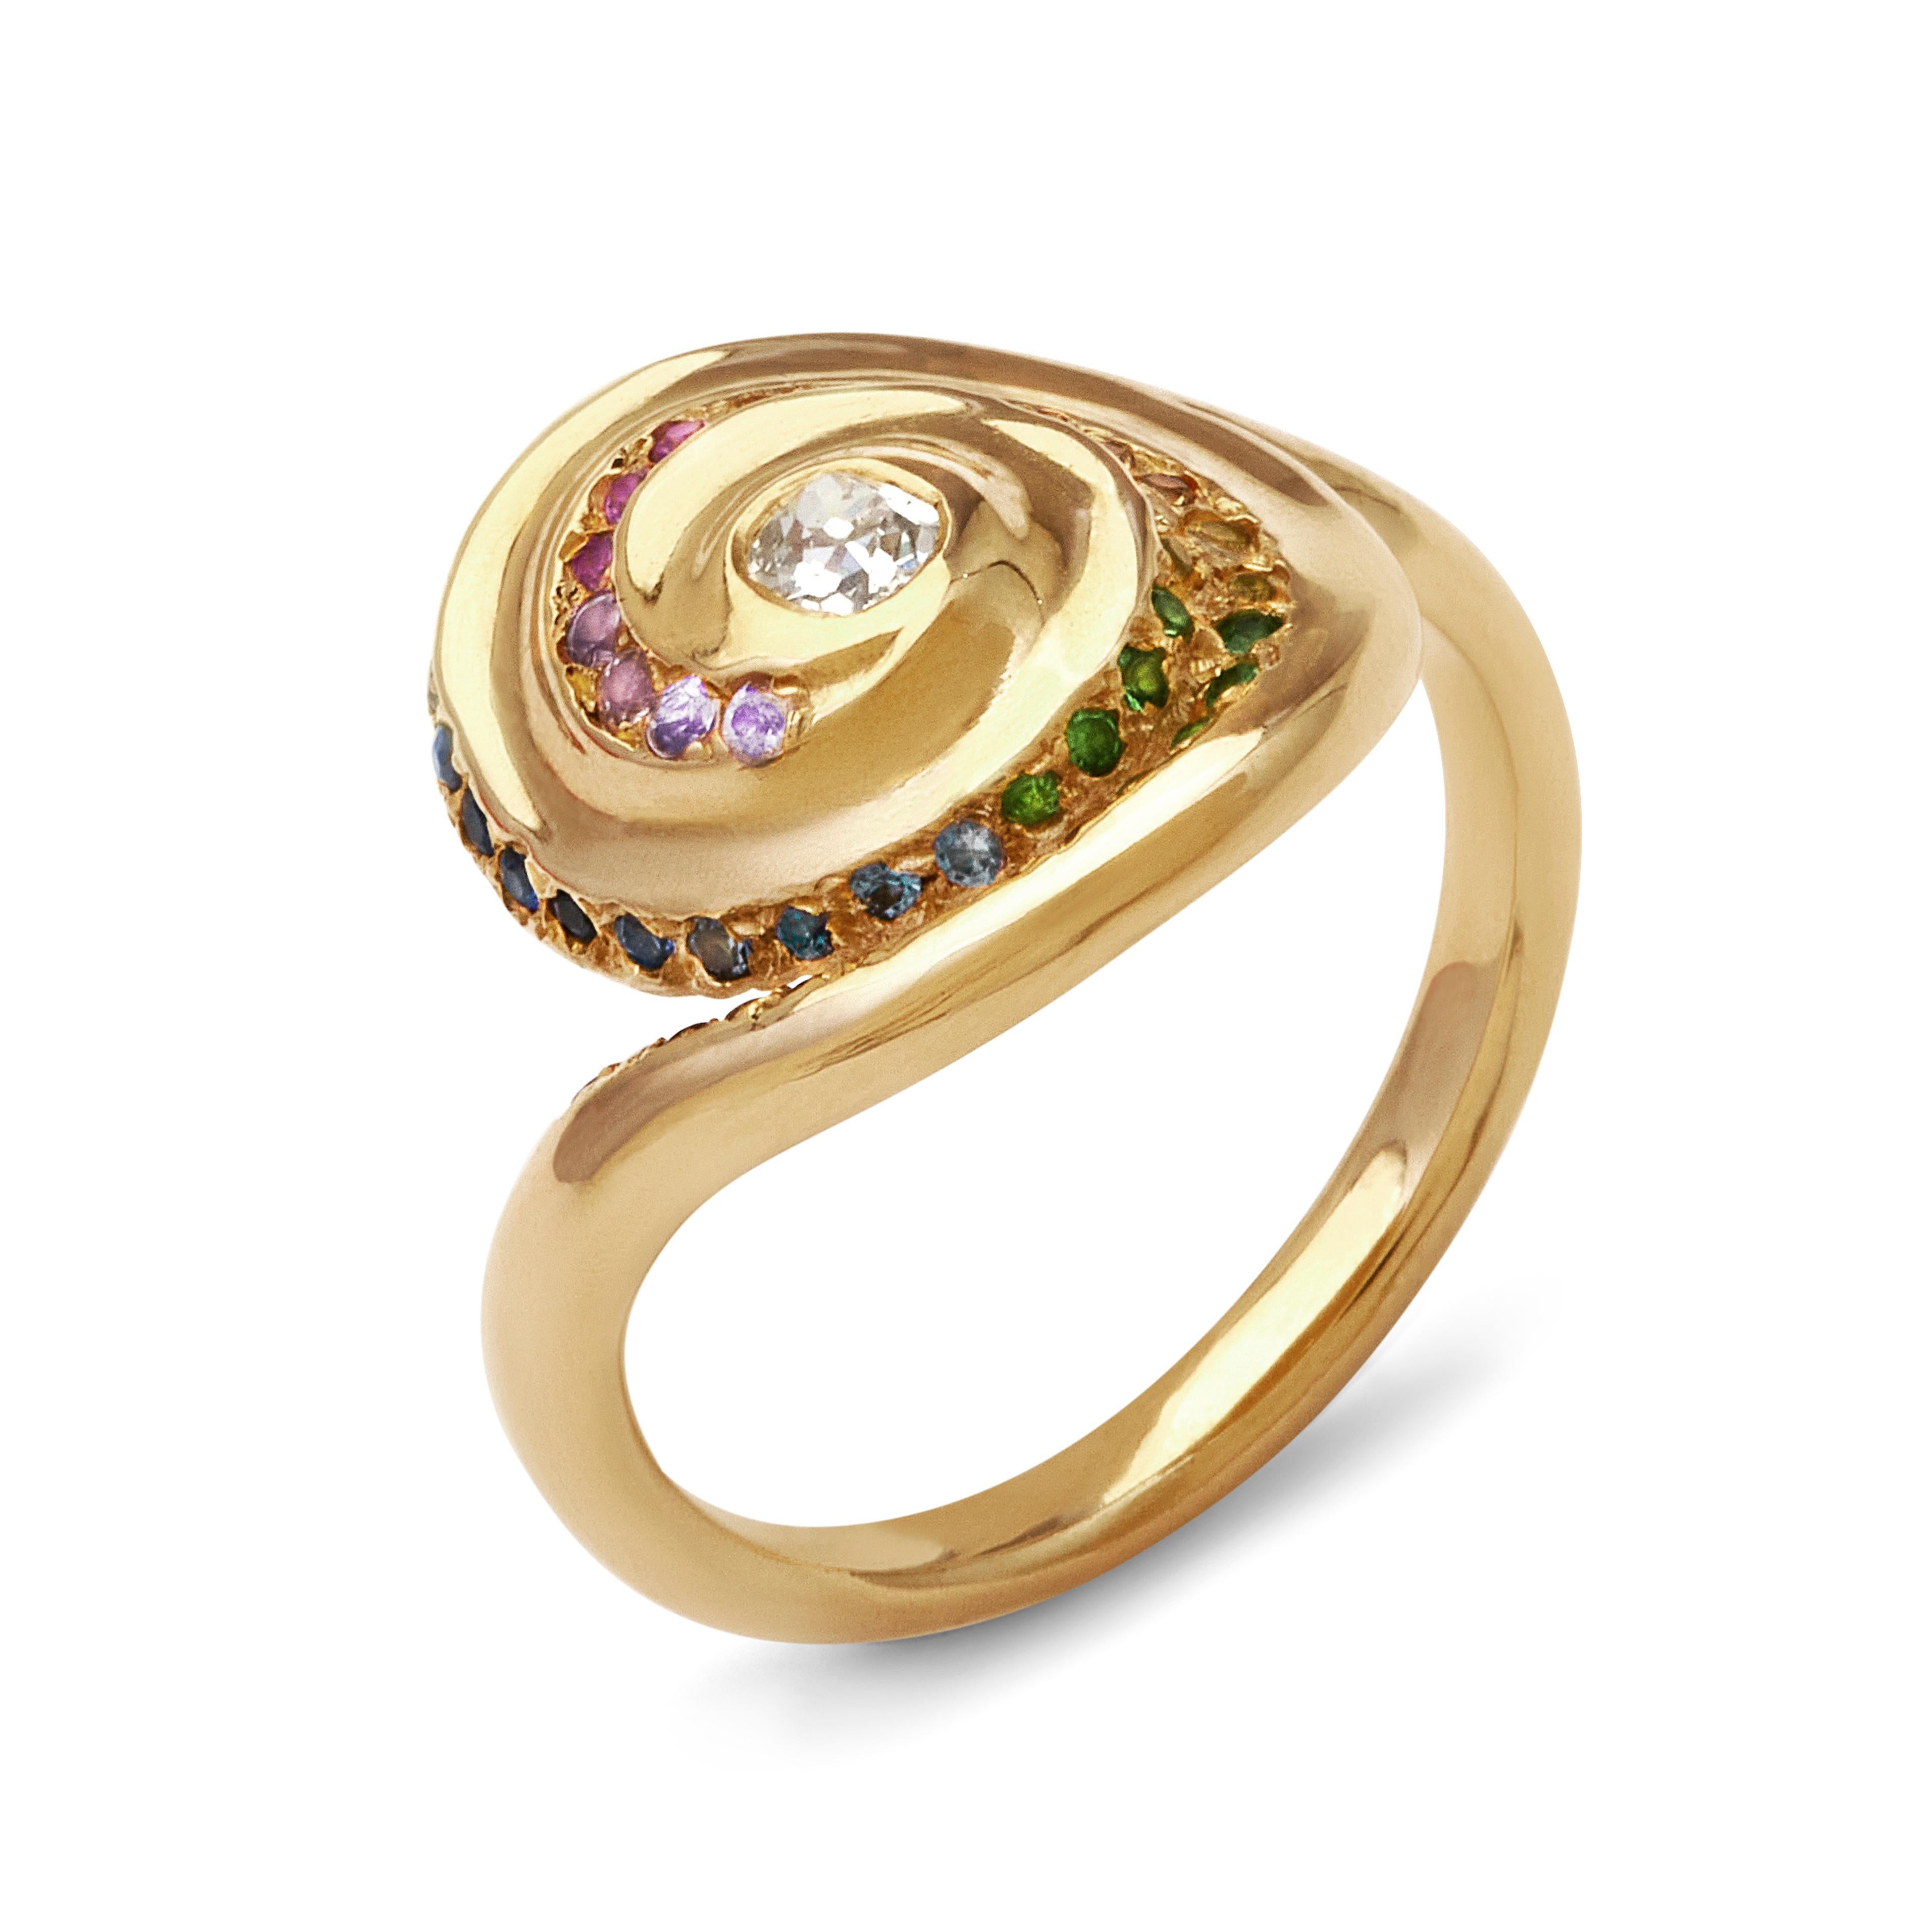 
Prepare to be utterly captivated by the mesmerizing whirlwind of vibrant colors that burst forth from this 18ct yellow gold ring, bedecked with an exquisite array of gemstones; Diamonds Sapphires, tsavorite garnets, and rubies. Brace yourself for